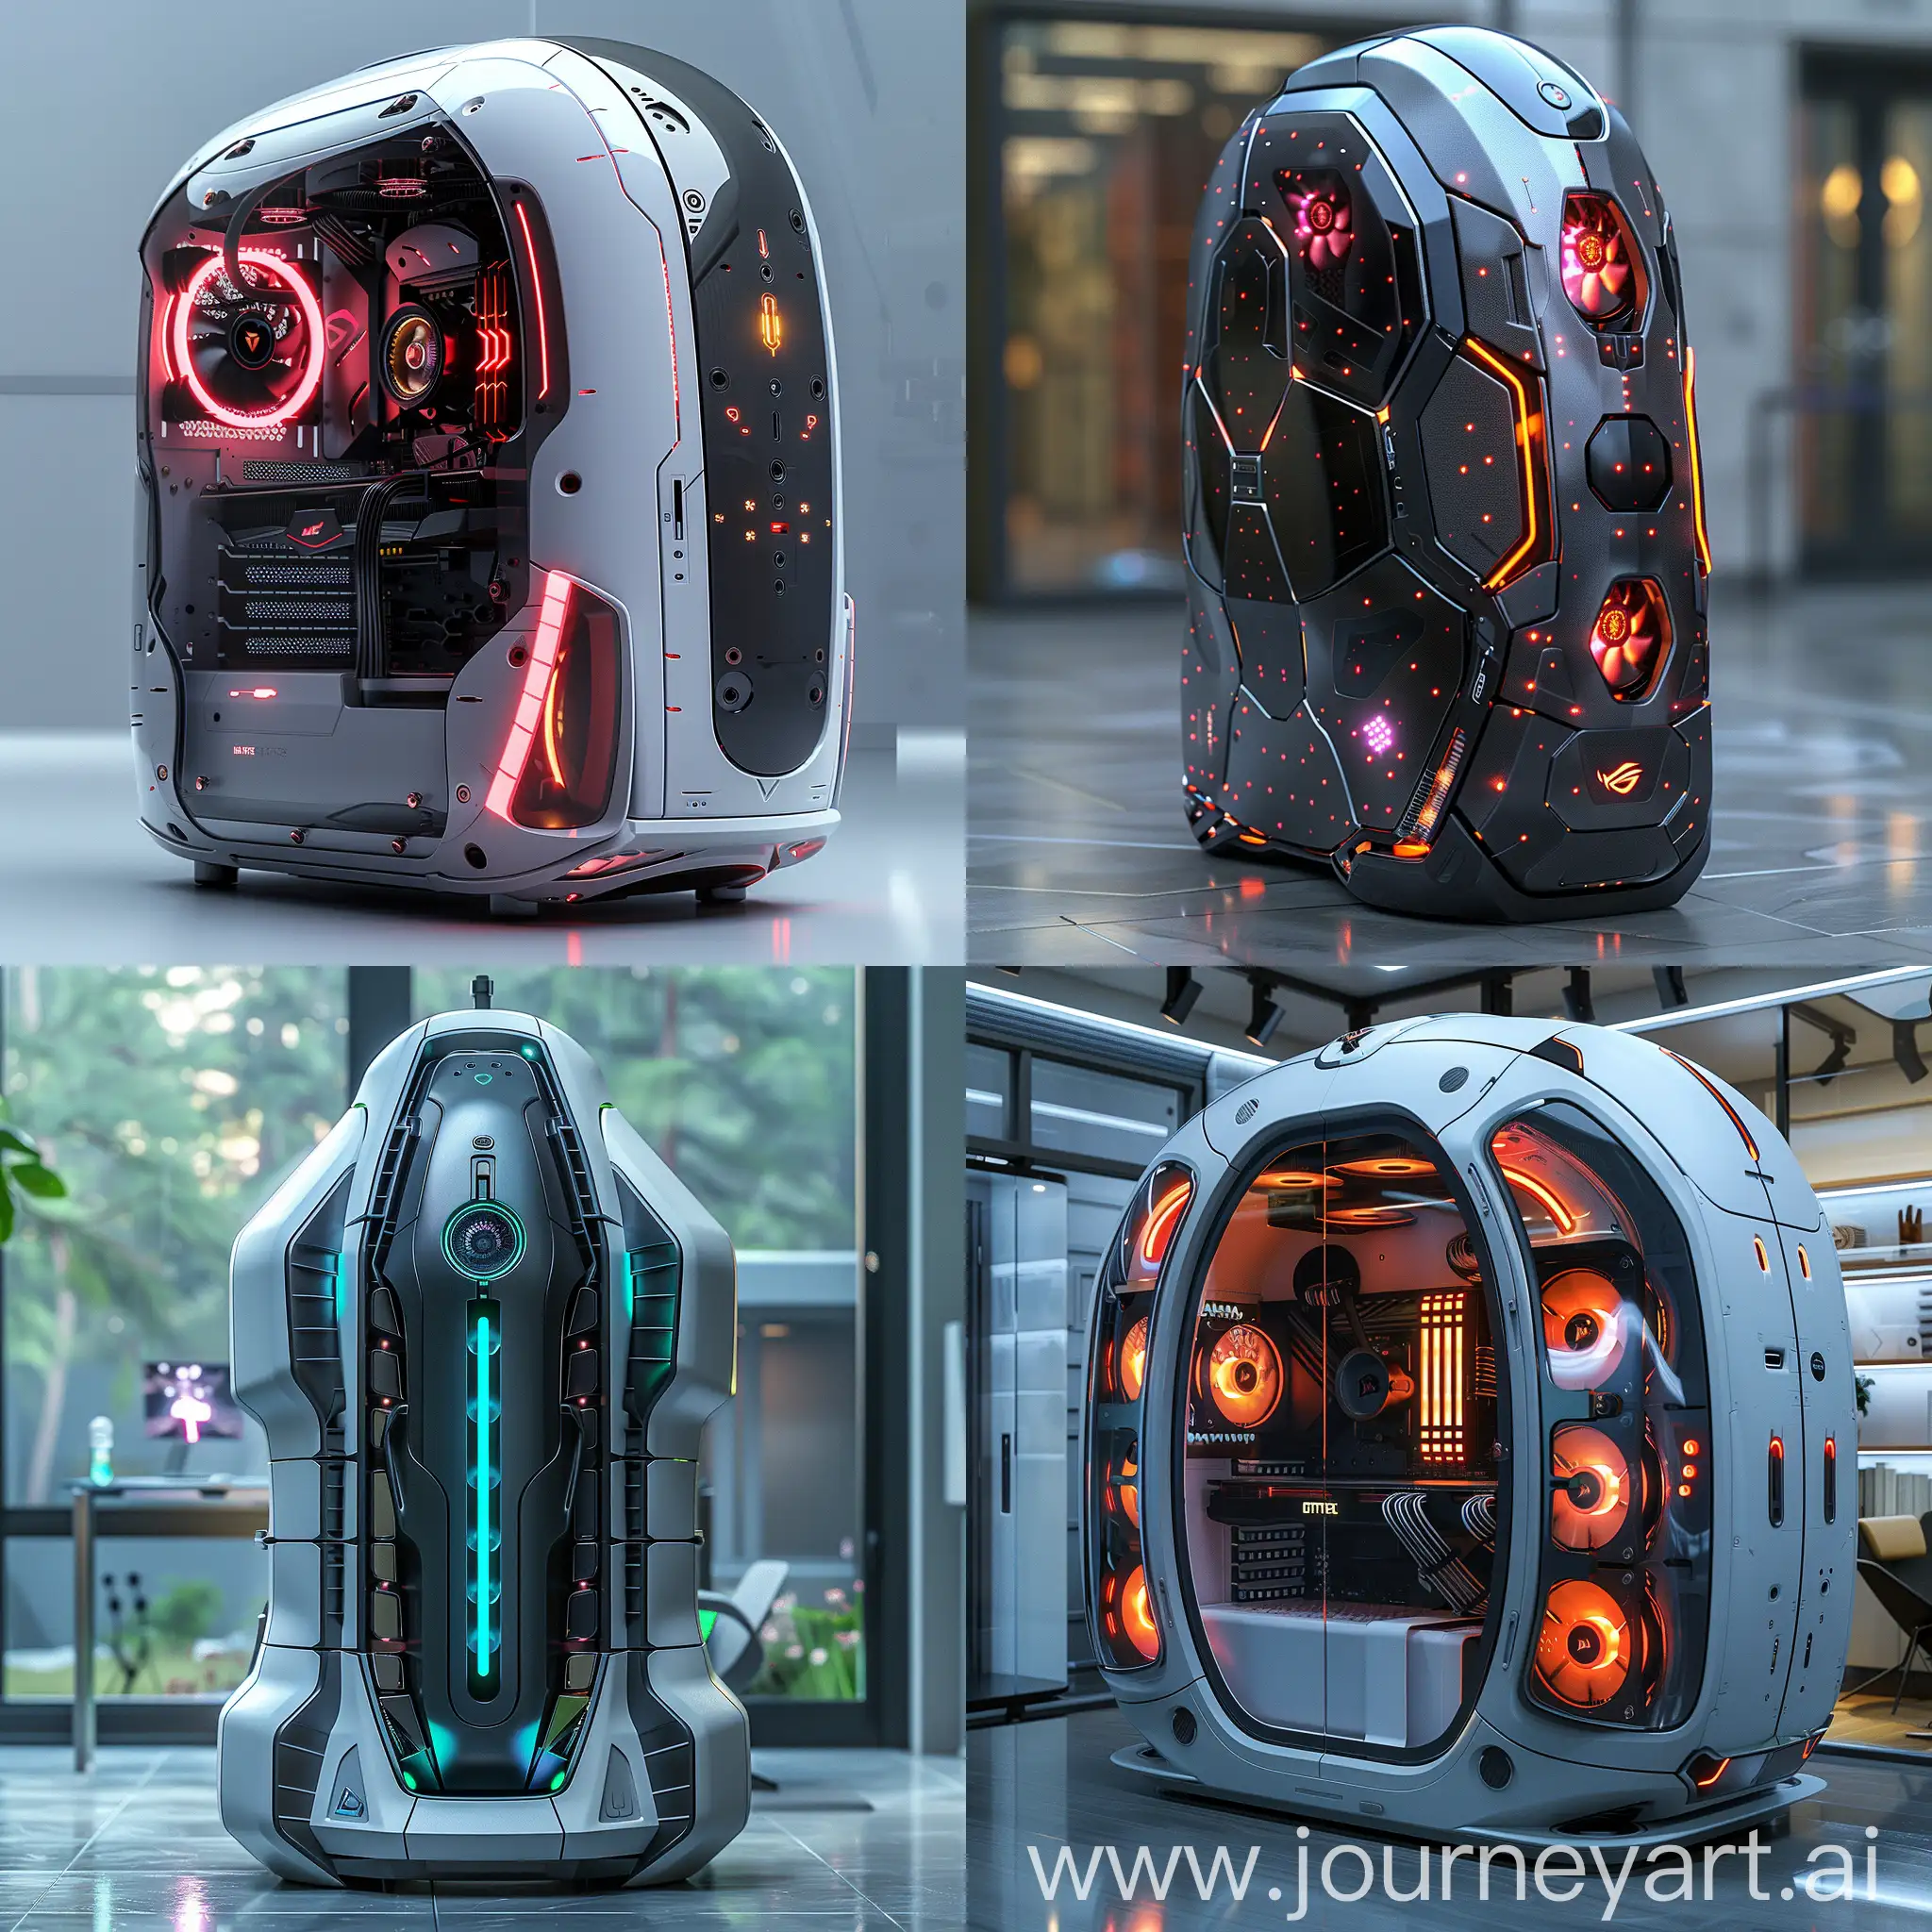 Futuristic-PC-Case-with-Morphing-Chassis-and-Integrated-AI-Features